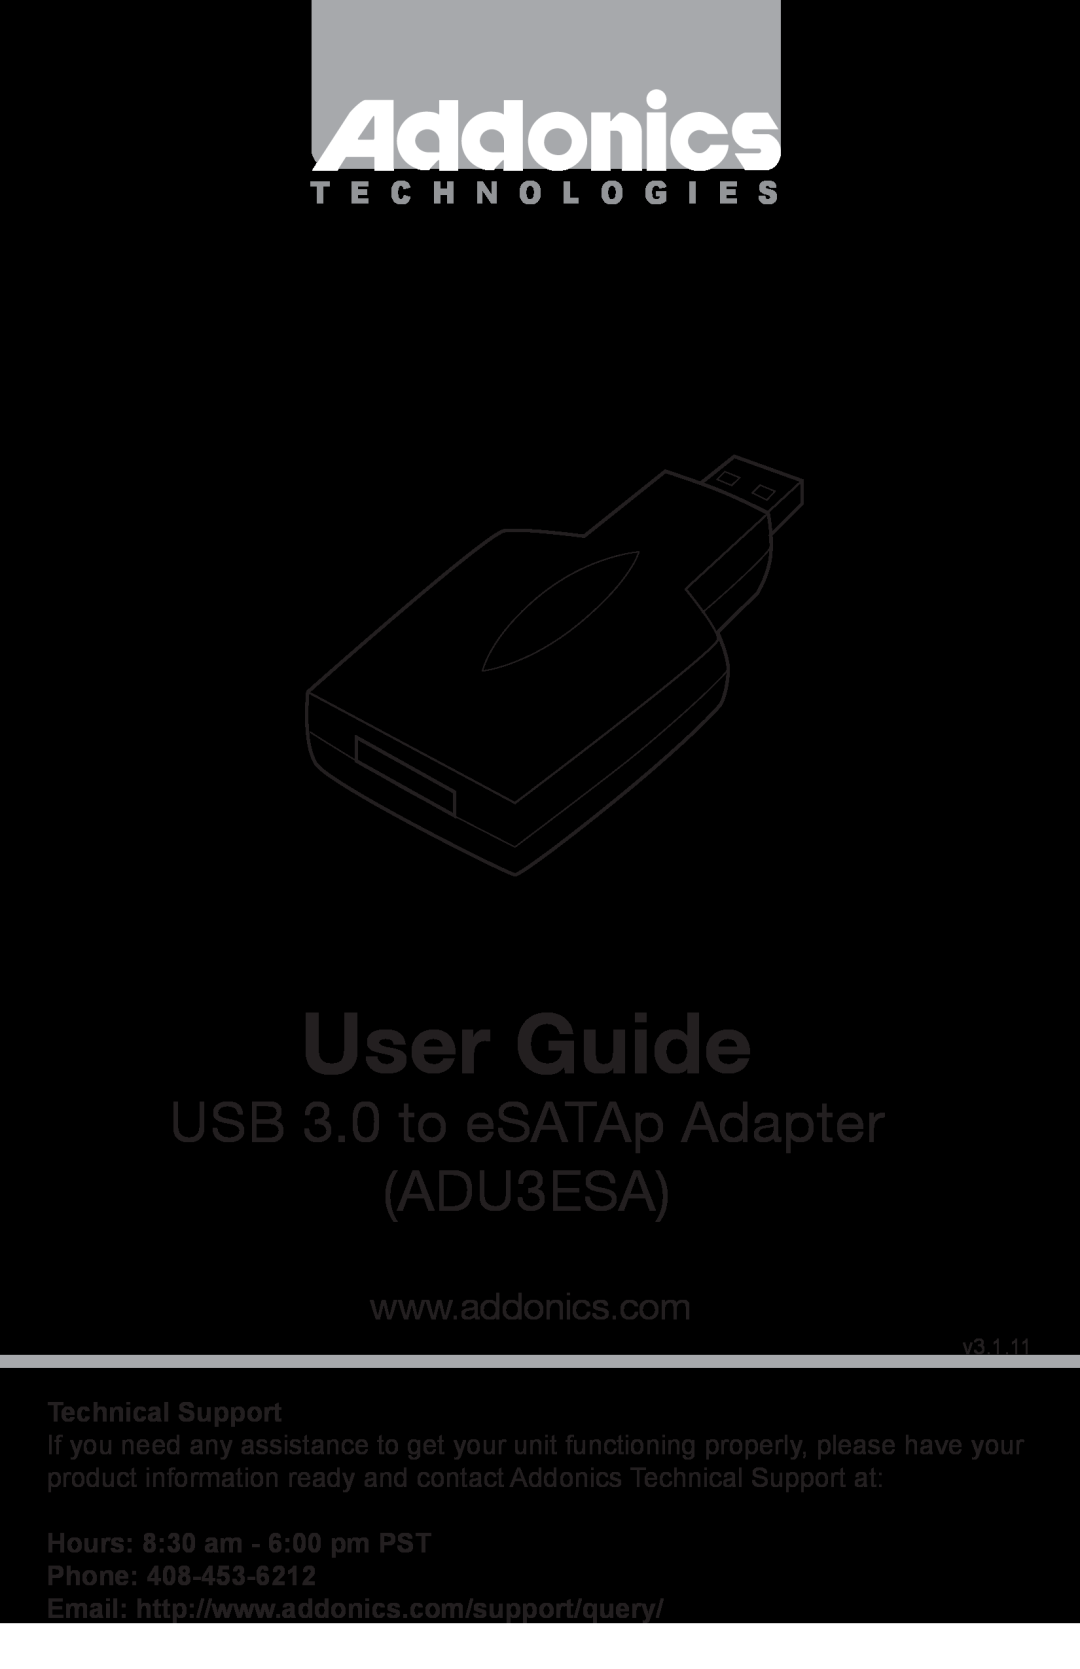 Addonics Technologies manual User Guide, USB 3.0 to eSATAp Adapter ADU3ESA, T E C H N O L O G I E S, Technical Support 